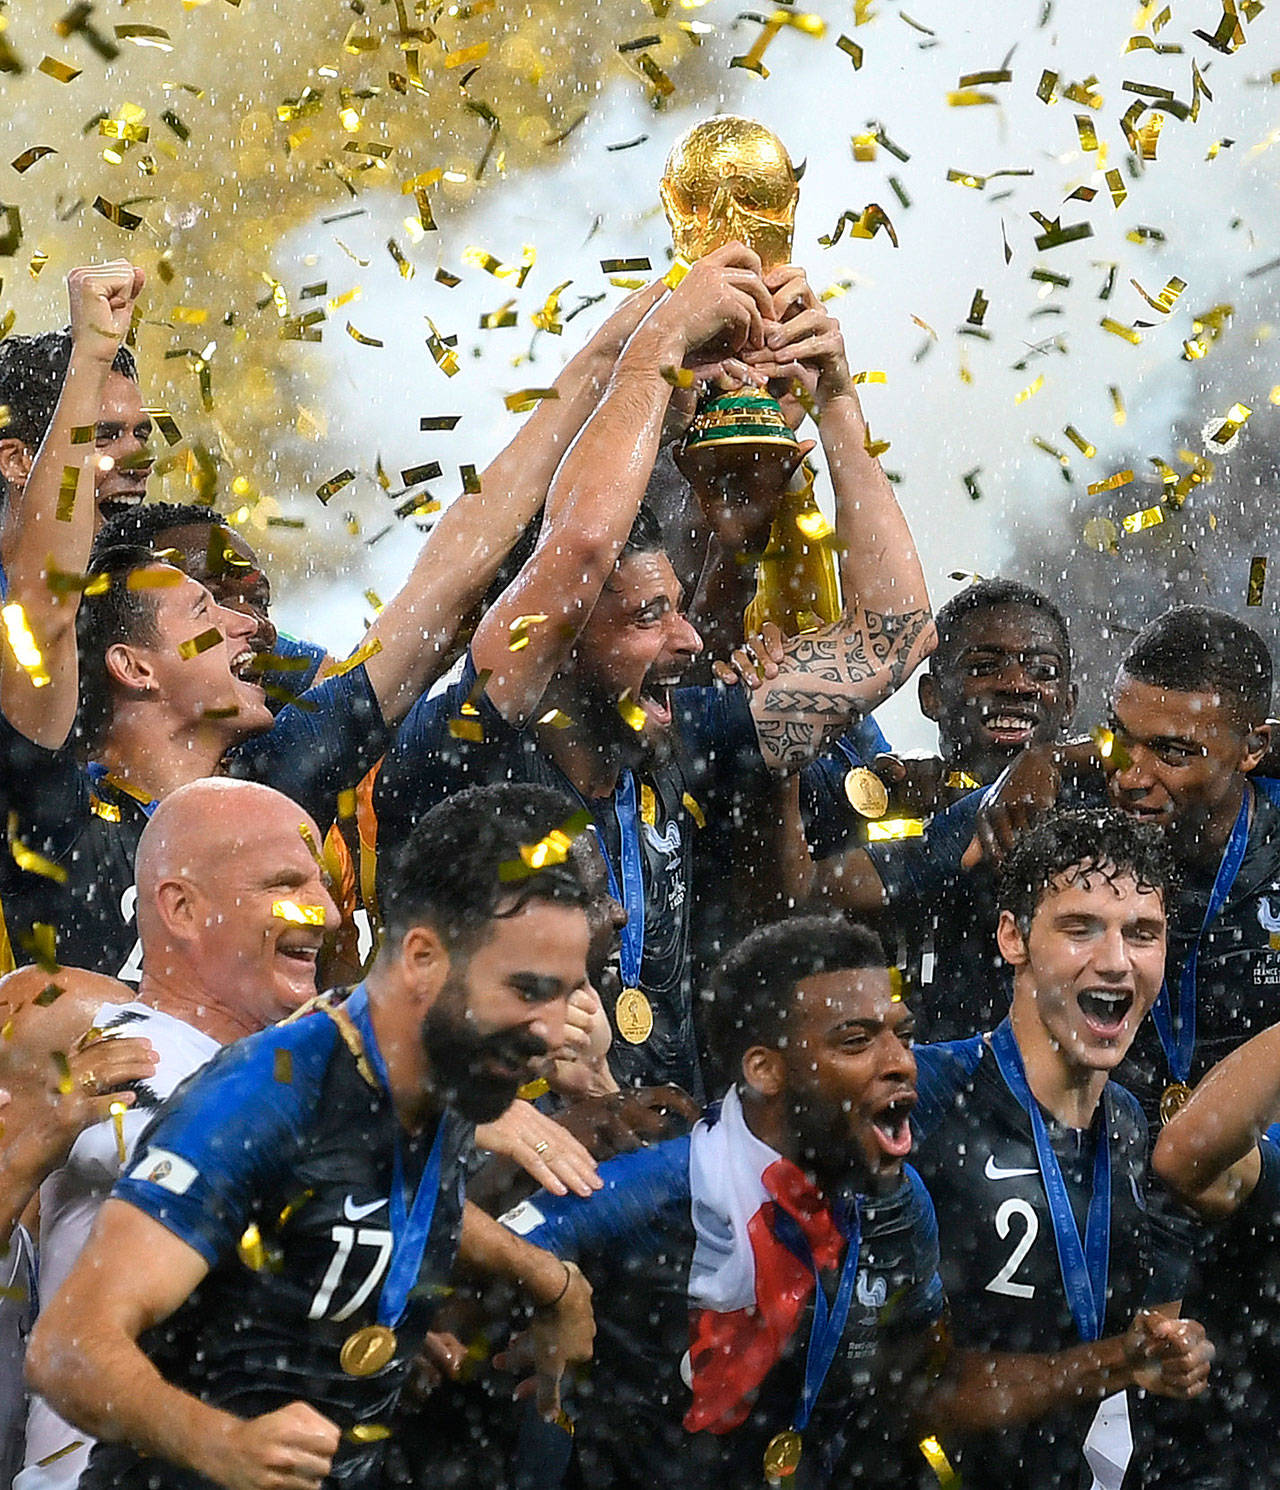 What to watch for in Sunday's World Cup final between France and Croatia